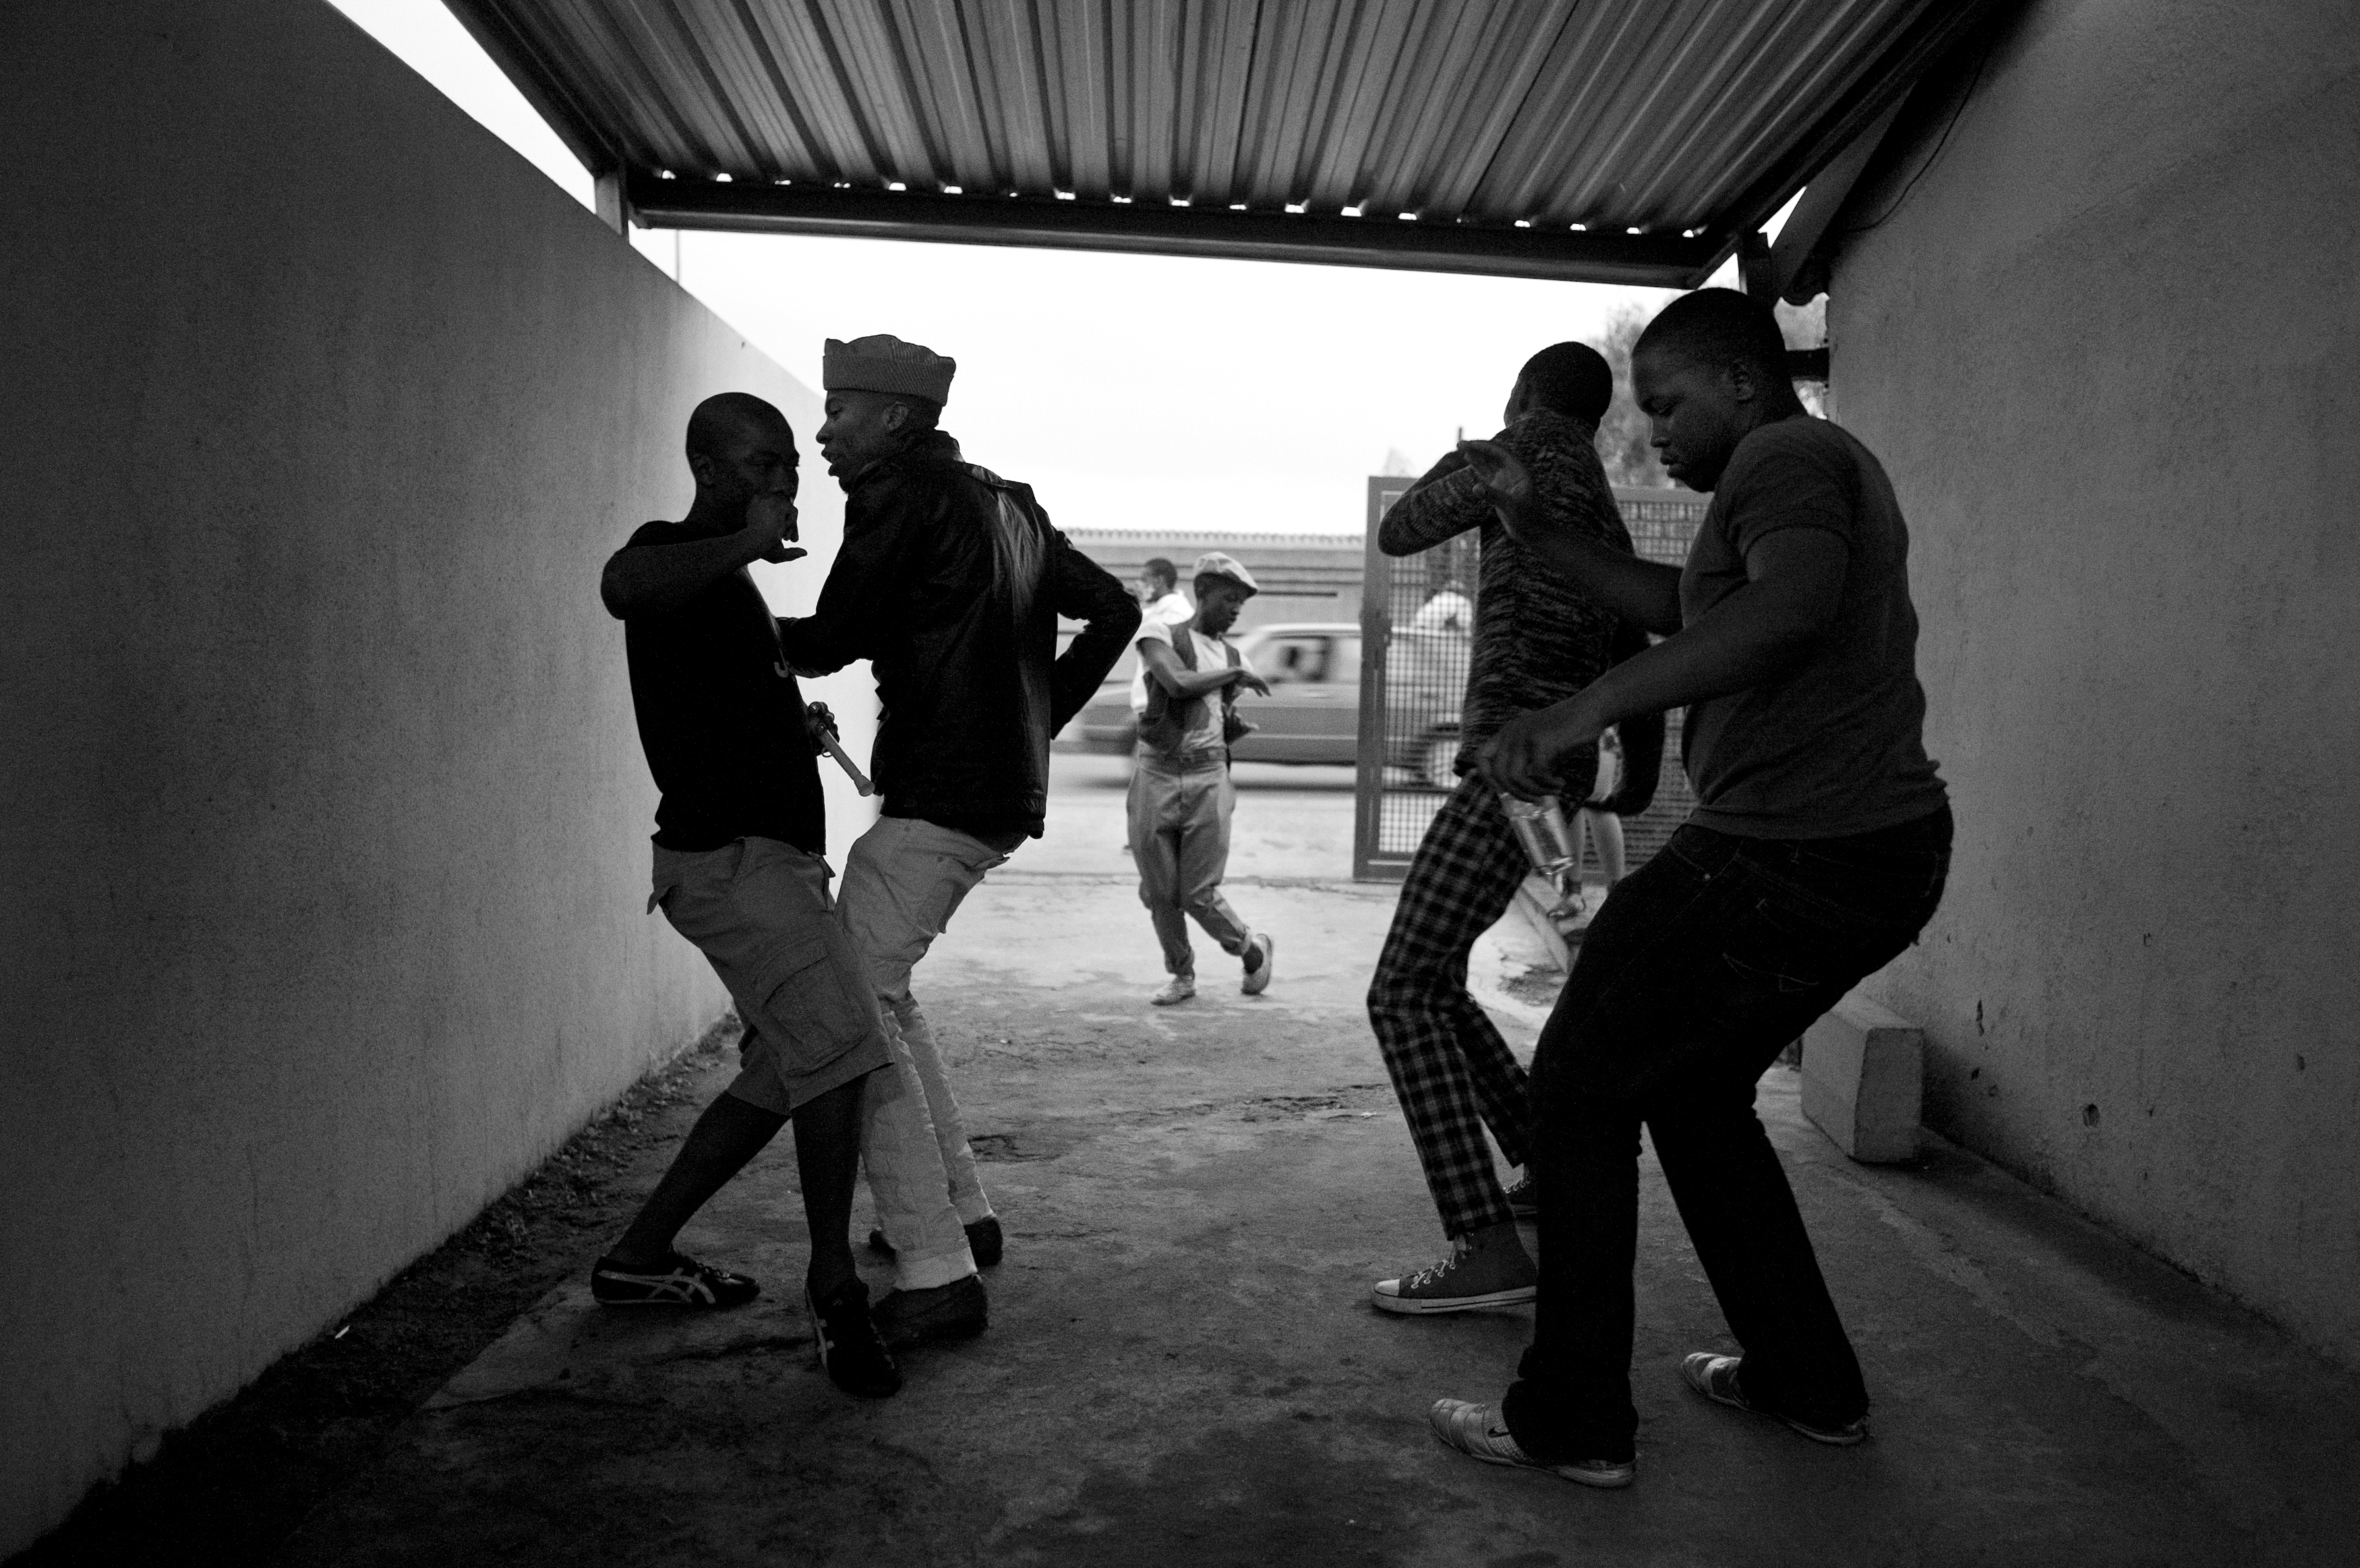 Smarteez members dance and cook dinner during a house party at Lethabo's home in Soweto.Since the days of Apartheid to its inevitable end watched closely by the world, South Africans have fought hard for collective change. This collective spirit can be seen within the community in both the politics and the arts. Since the early post-Apartheid days, Kwaito—a musical genre and culture emerging out of the South African townships—has told stories beyond just the fashion and style of dance, but also to a life impoverished and the collective spirit of the young, sexual, and free looking towards change.Today, many middle class youth will argue whether Kwaito is dead or has just evolved. But one thing is certain: the new rising middle class youth of South Africa have begun to search for expression in more individual ways. Fighting a different fight from their parents, this generation is taking the opportunity to find their sense of self. One influential group emerging from Soweto’s streets calls themselves the Smarteez, after a popular, colorful candy. These young fashionistas are quickly joining the ranks of a growing middle class youth, inspiring a new generation to break from tradition and express individuality through fashion, music, and art. All original Smarteez members are from Soweto and either met growing up in the same Apartheid-styled neighborhoods or attending integrated suburban schools their parents viewed as gateways to new and better opportunities. As classmates at the University of Johannesburg’s fashion school, they bonded over a shared experience of being raised in these two distinct worlds. By sharing designs and crashing elite fashion parties, they created a milieu of risk-taking that evolved into a movement whose liberating ideas resonated with youth around the country.While South Africa still has the second highest murder rate in the world, one of the worst HIV/AIDS epidemics, and a high unemployment rate, it also has an expanding and